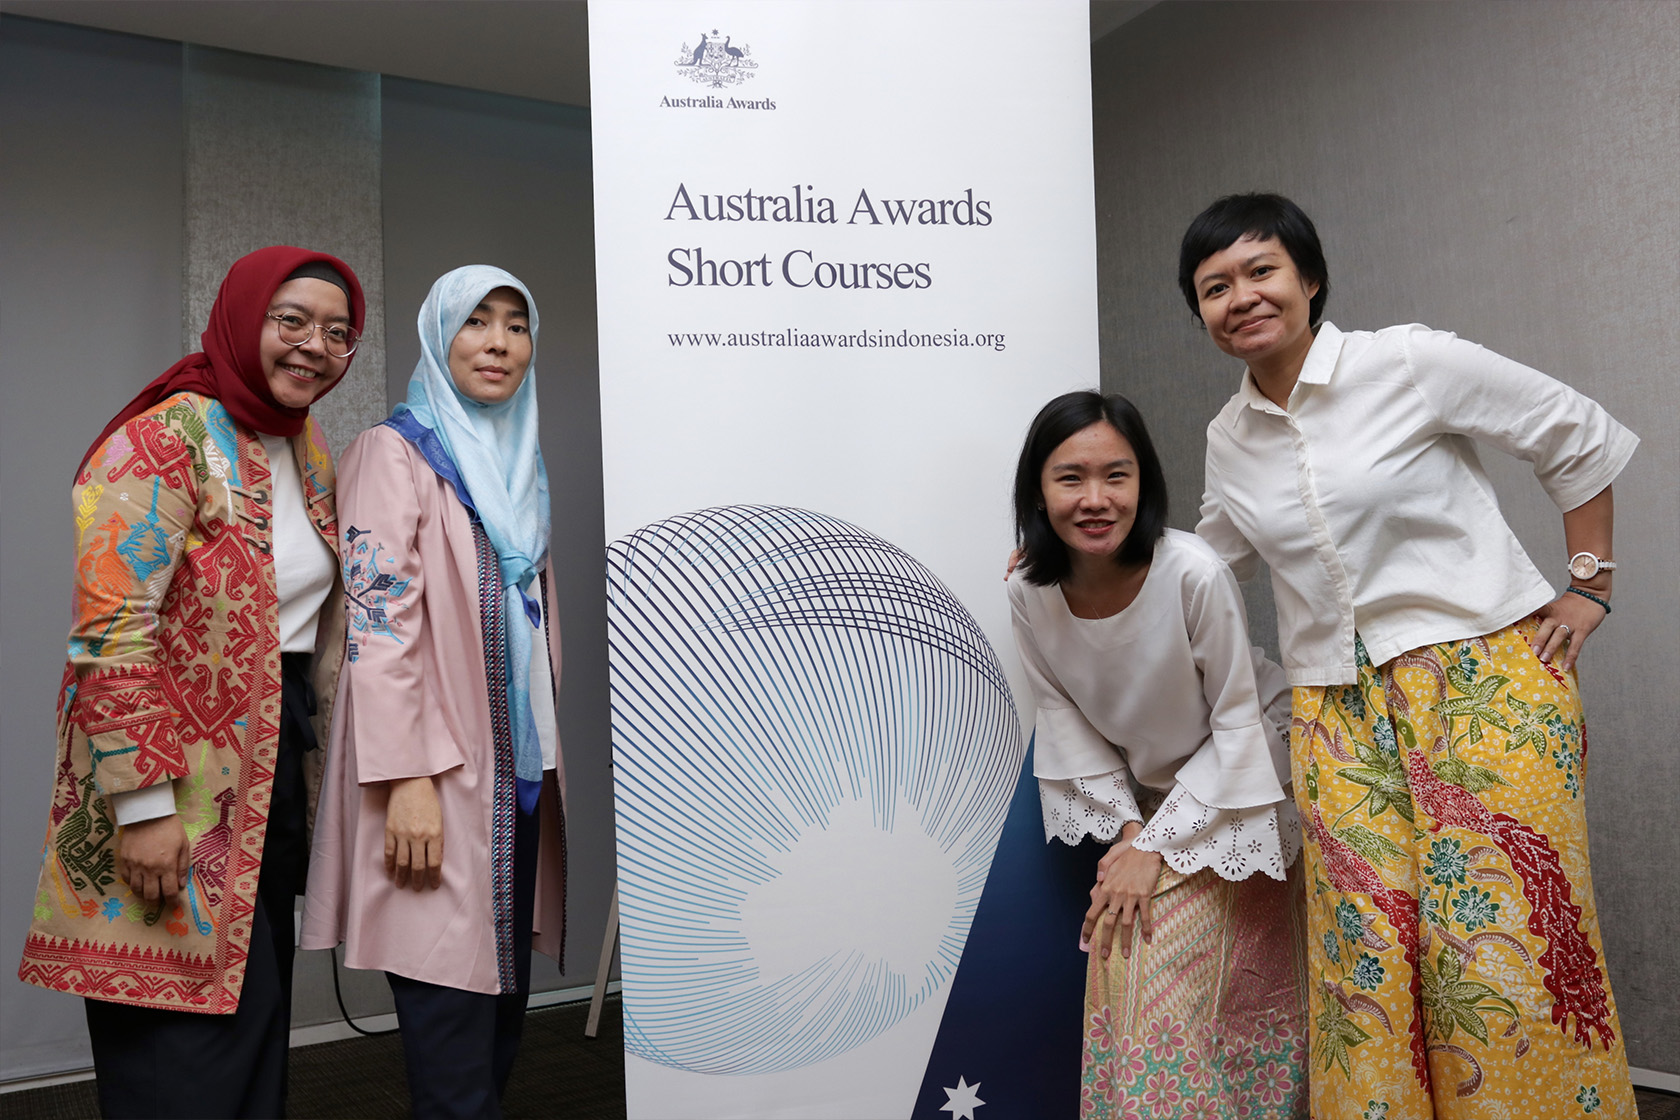 Four alumnae are standing and posing with Australia Awards Short Course standing banner